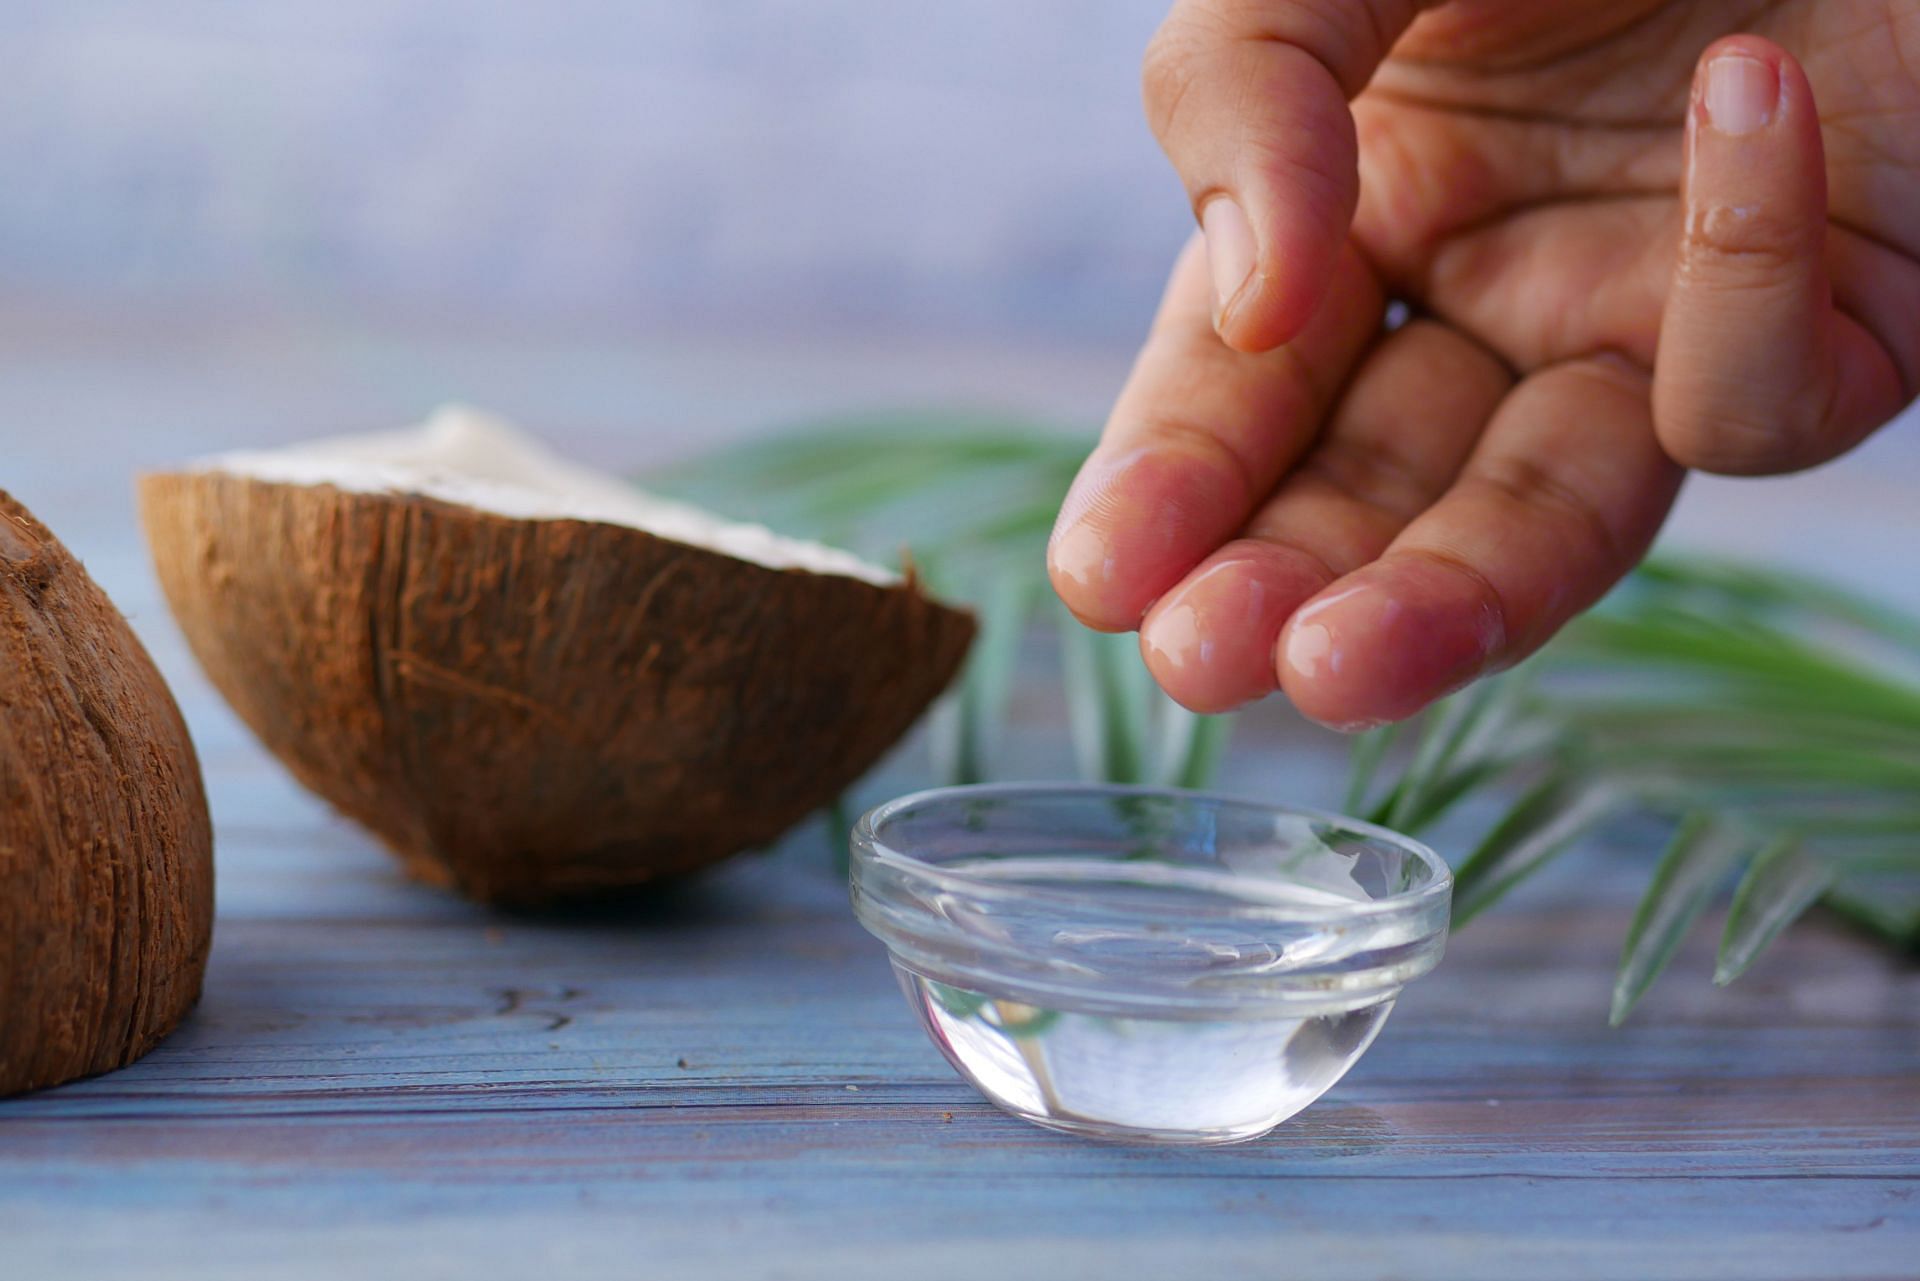 Coconut oil is a natural remedy that has been used for centuries to promote healthy skin and hair (Image via Pexels)